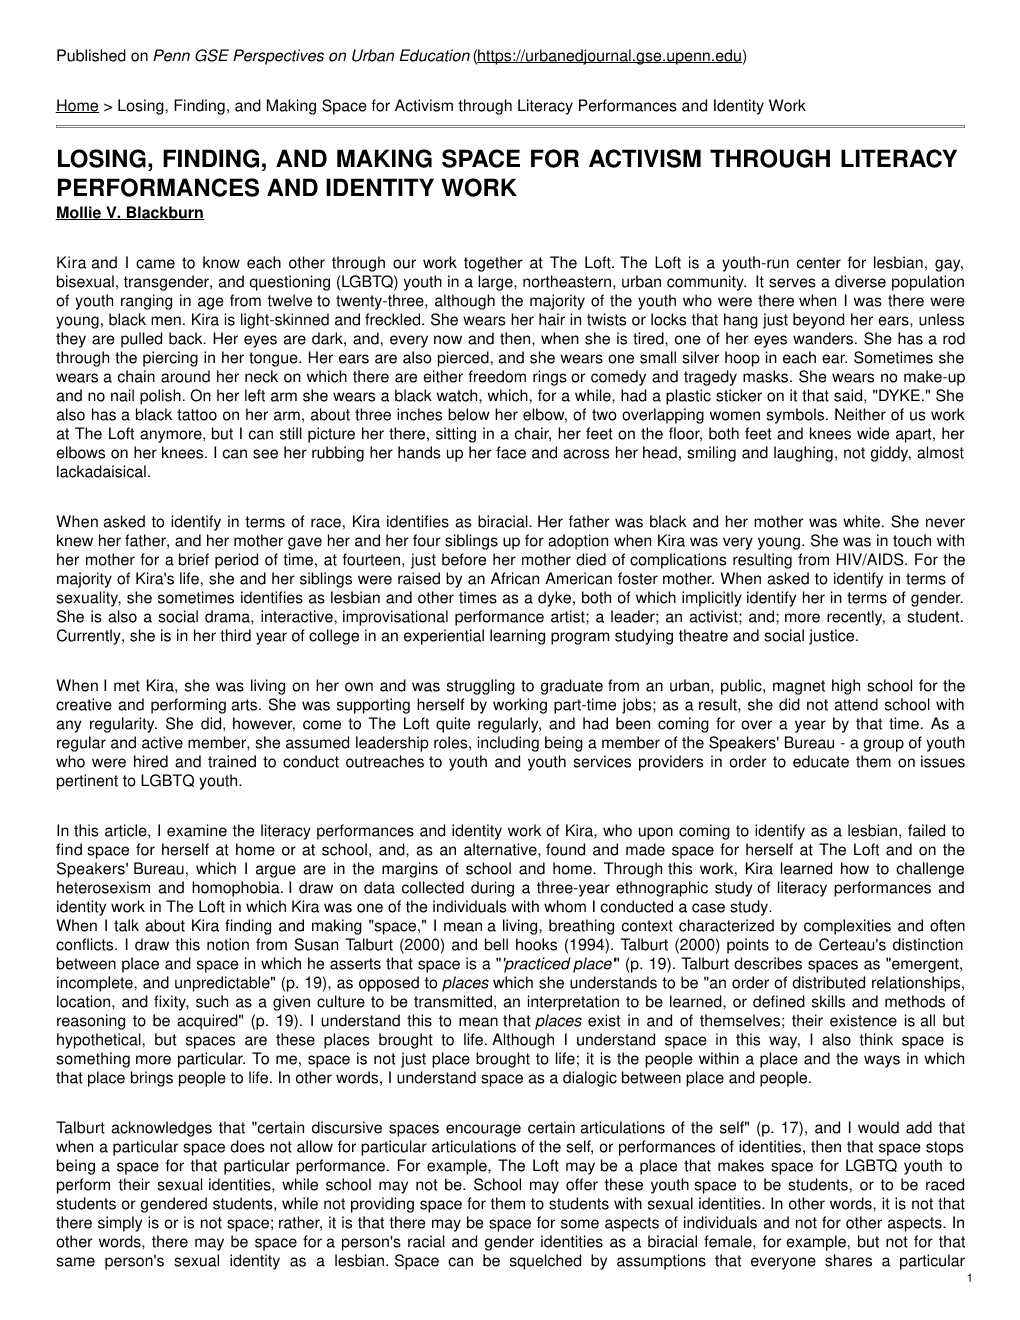 Losing, Finding, and Making Space for Activism Through Literacy Performances and Identity Work